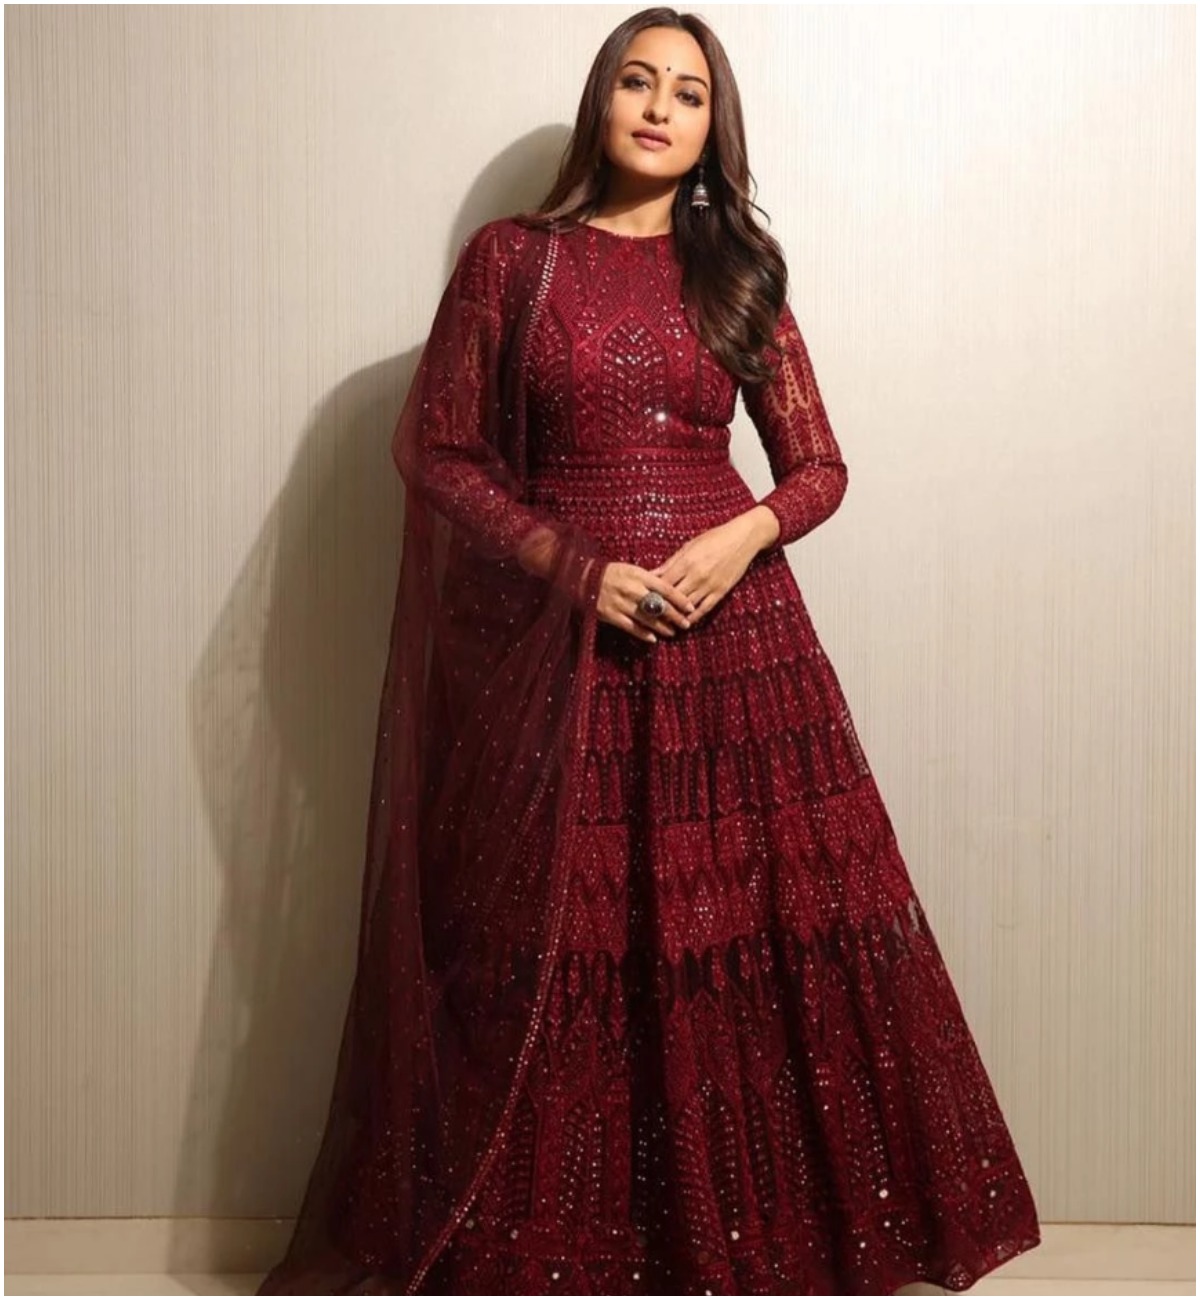 Navratri 2019 Office Outfit Ideas: Take Some Style Cues from Kareena ...